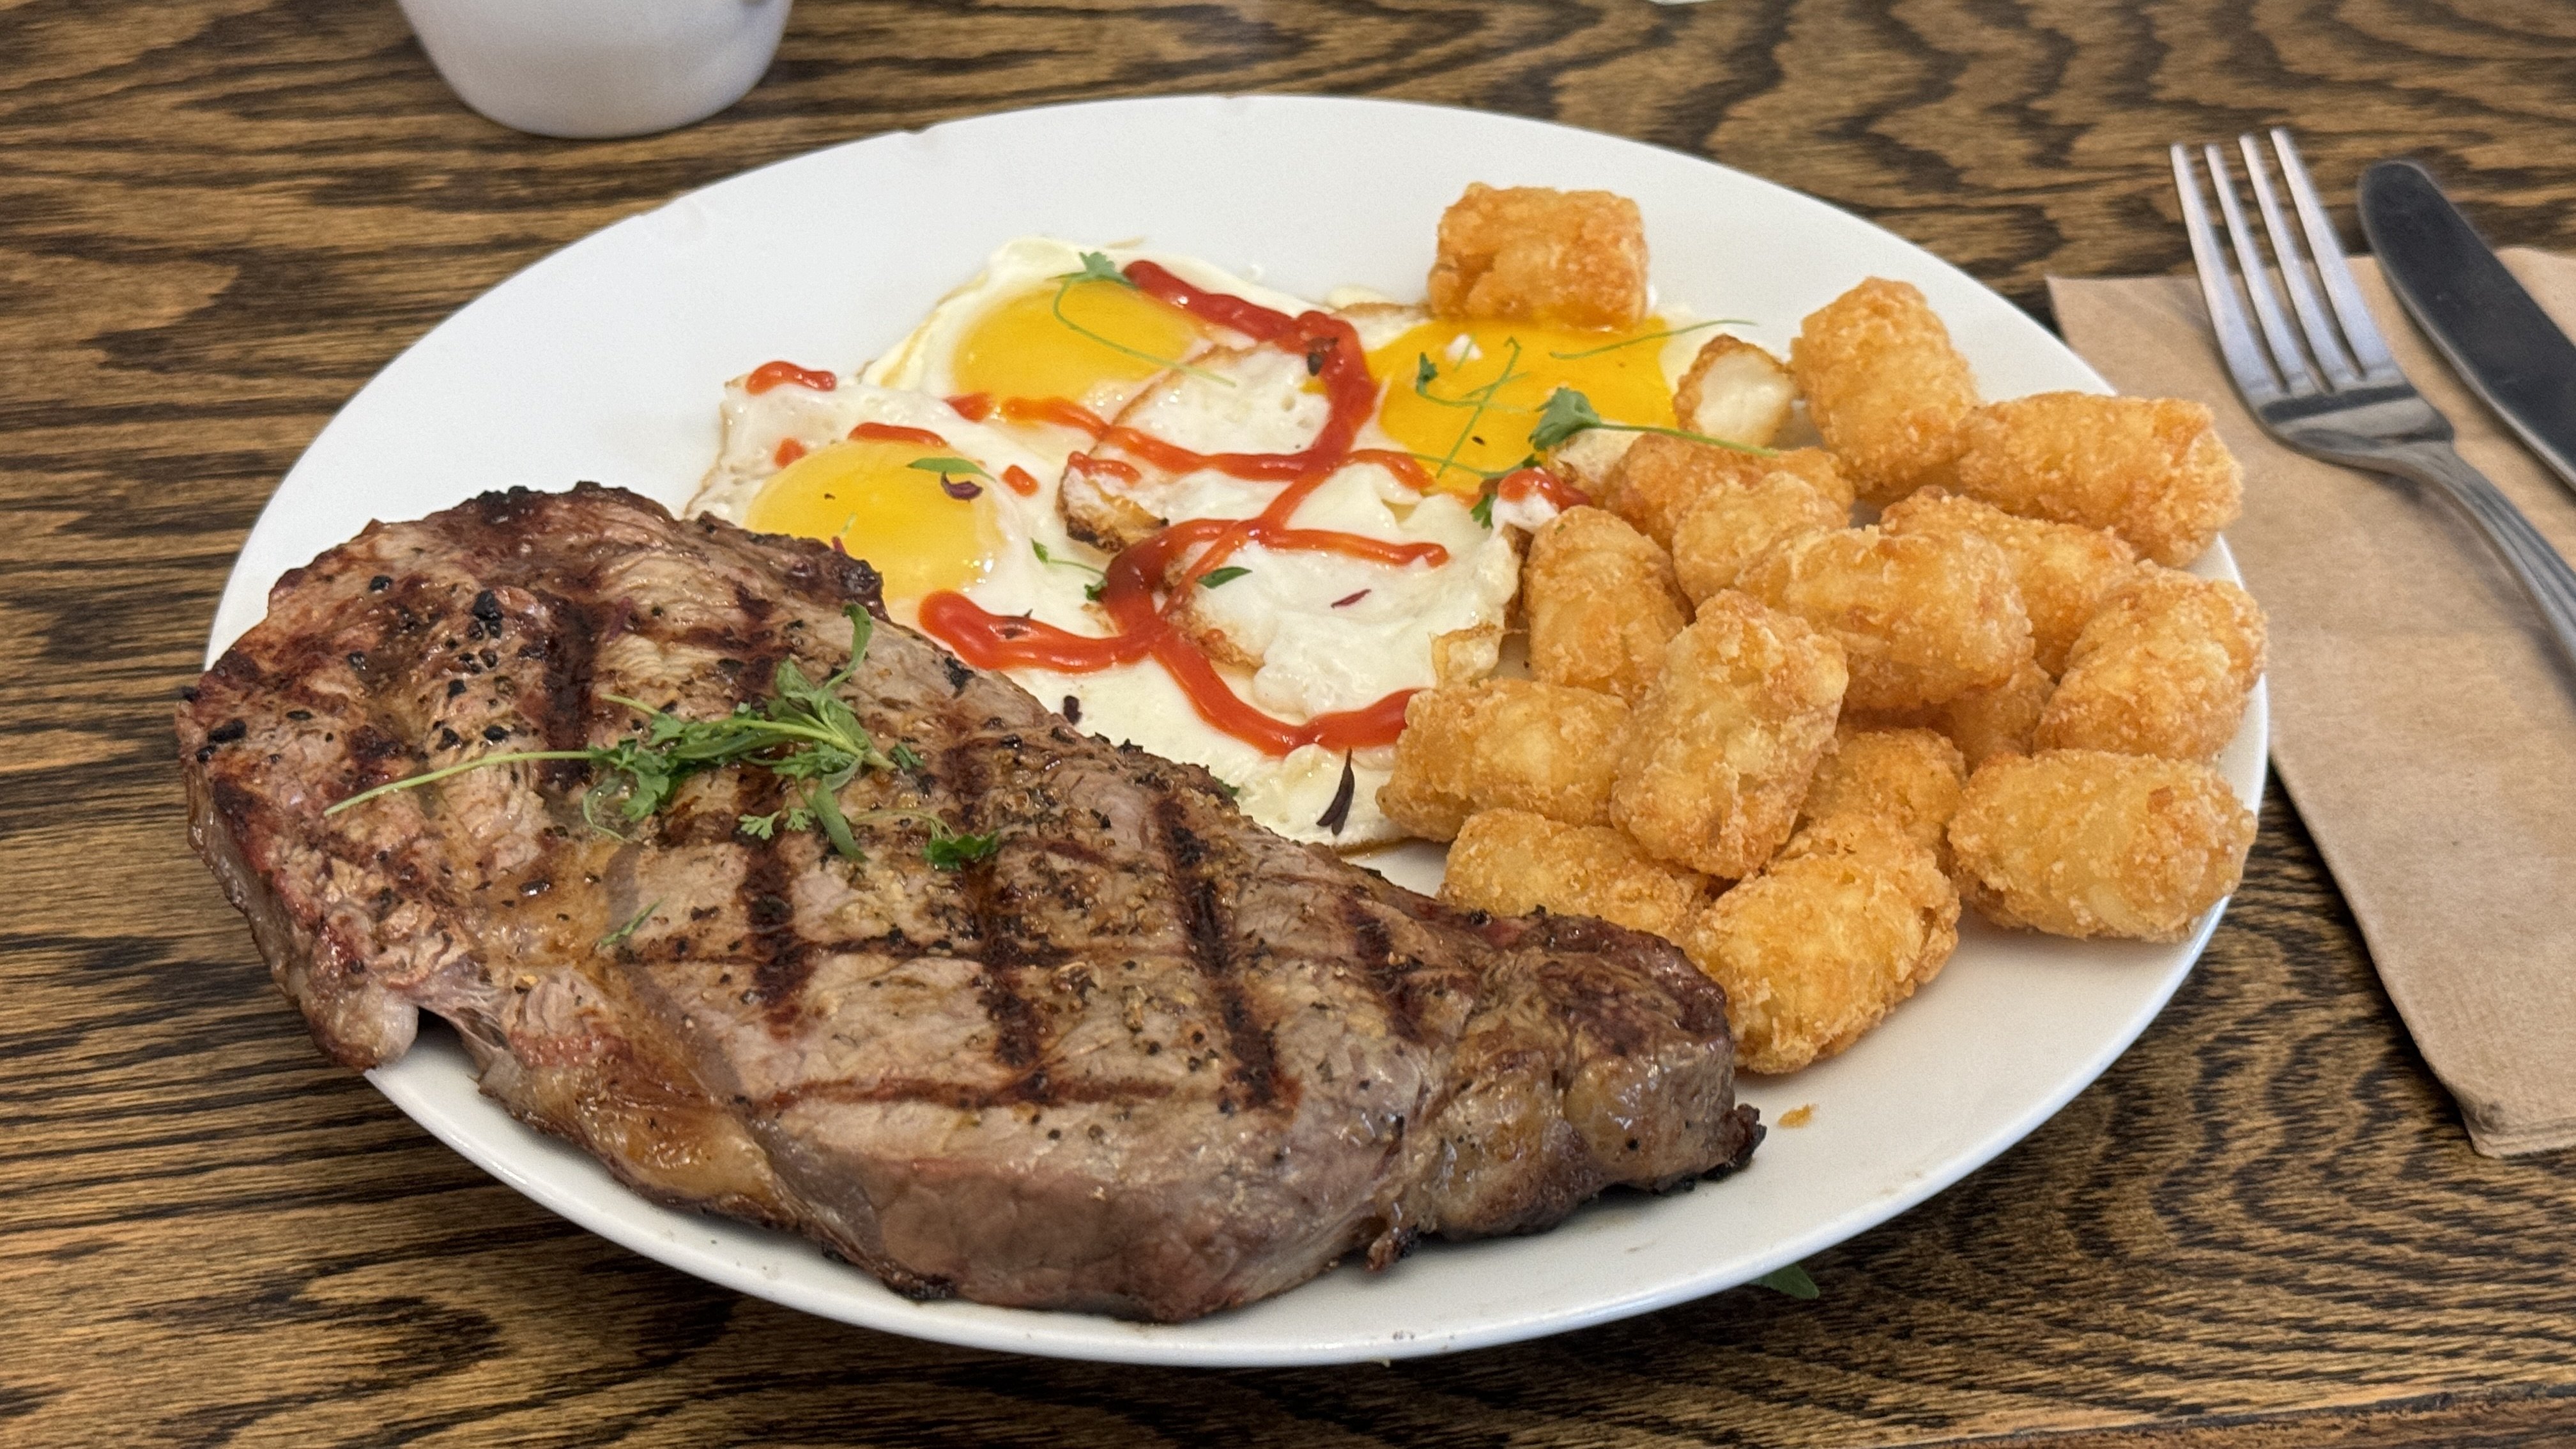 Steak & eggs at Vic's Restaurant. The tots went to my wife since I'm on a keto diet